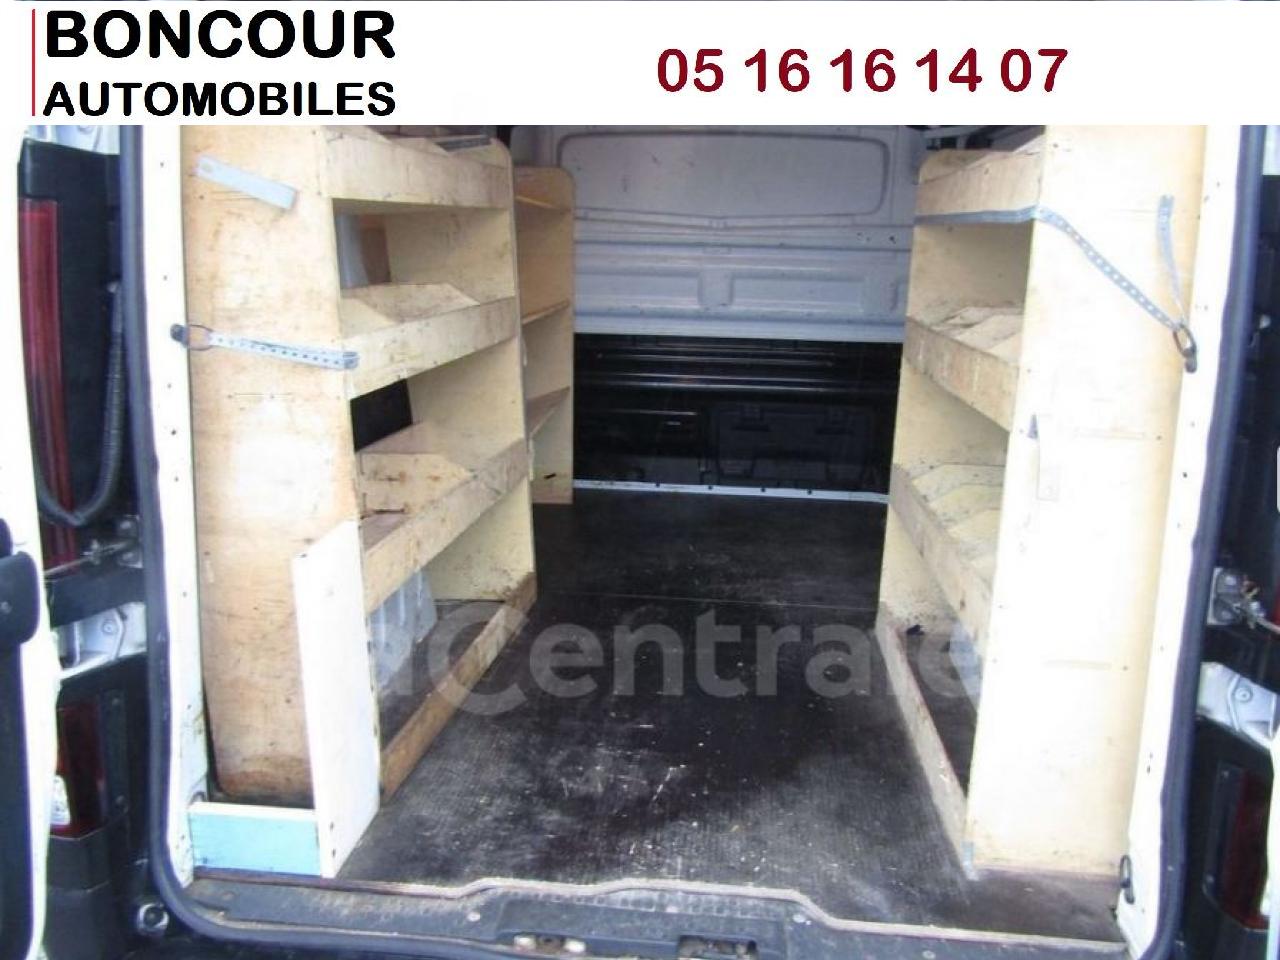 APPRO VO - RENAULT-TRAFIC-Trafic L1H1 1000 Kg 2.0 Energy dCi - 145 - BV EDC  III FOURGON Fourgon PRO+ L1H1 PHASE 2